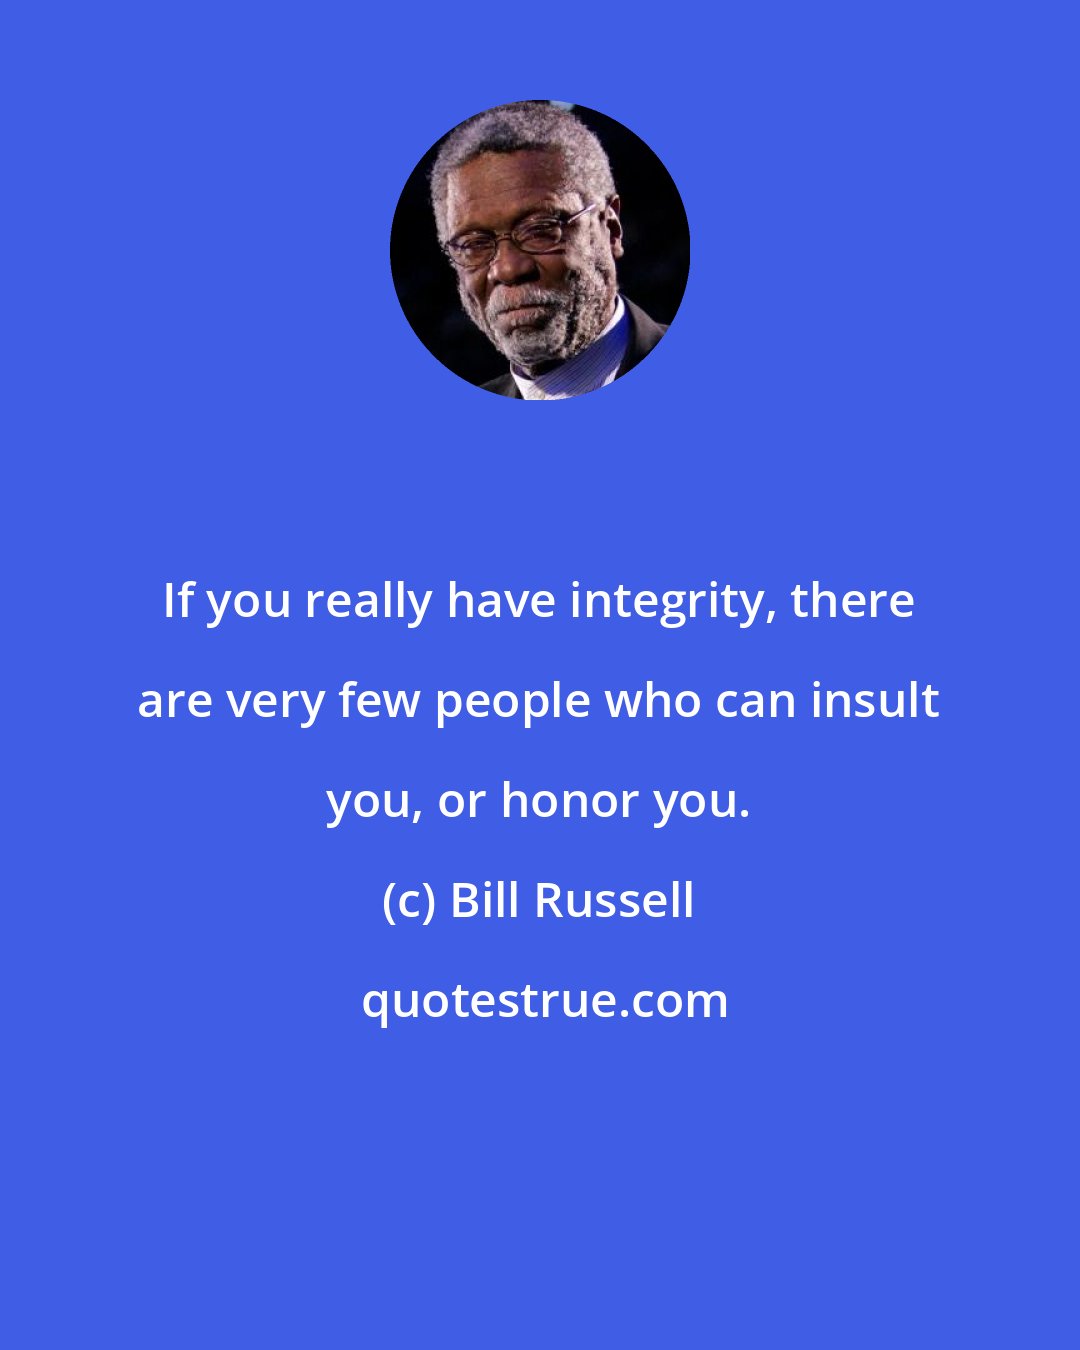 Bill Russell: If you really have integrity, there are very few people who can insult you, or honor you.